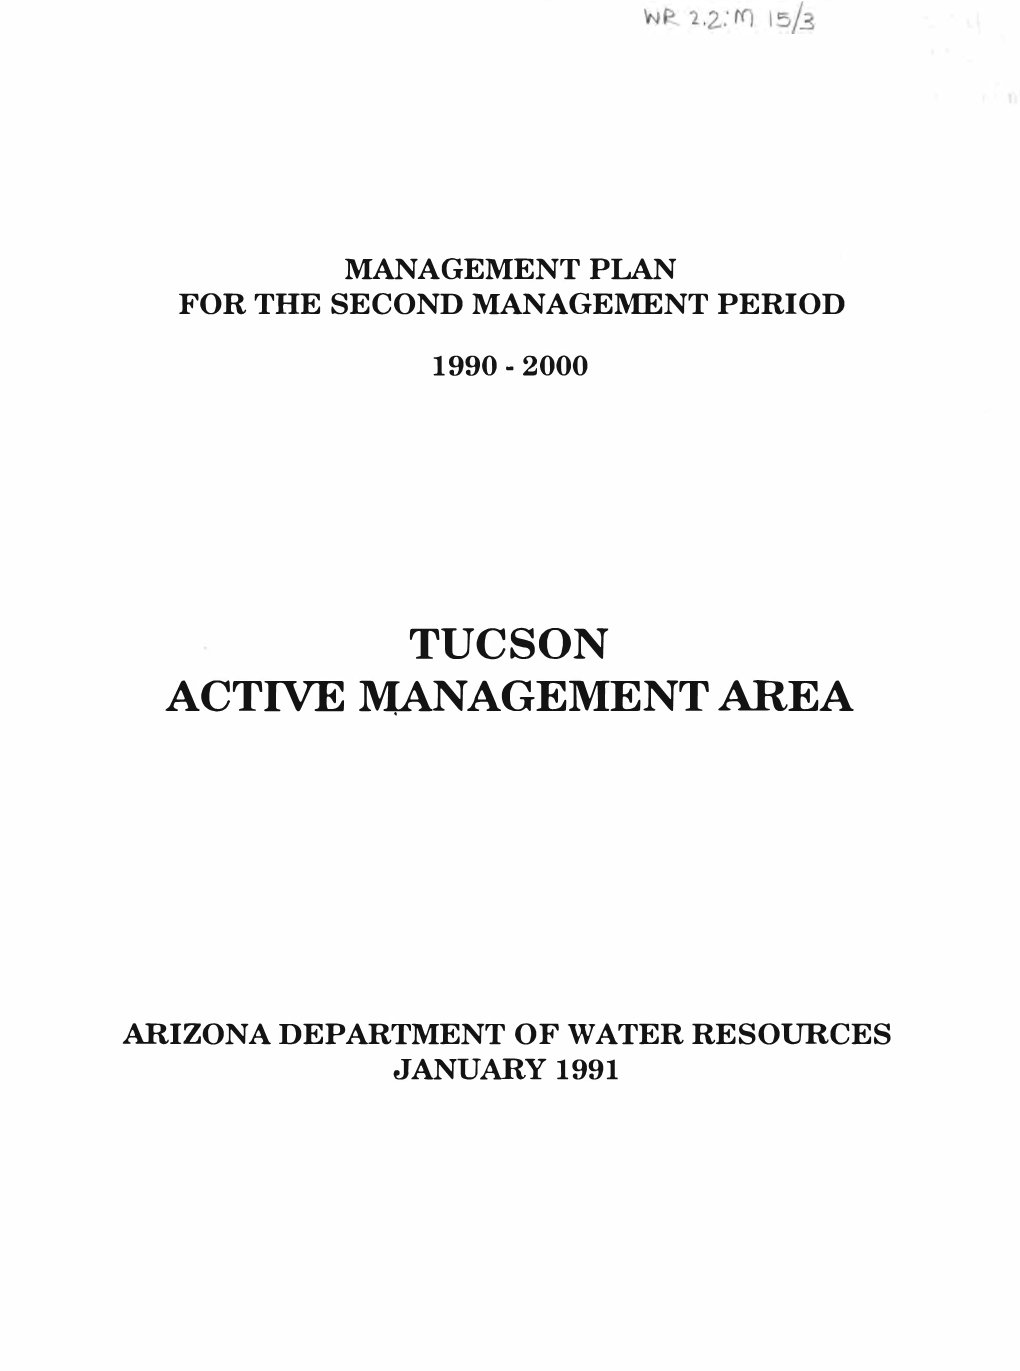 Tucson Active Management Area During the Last Decade of This Century